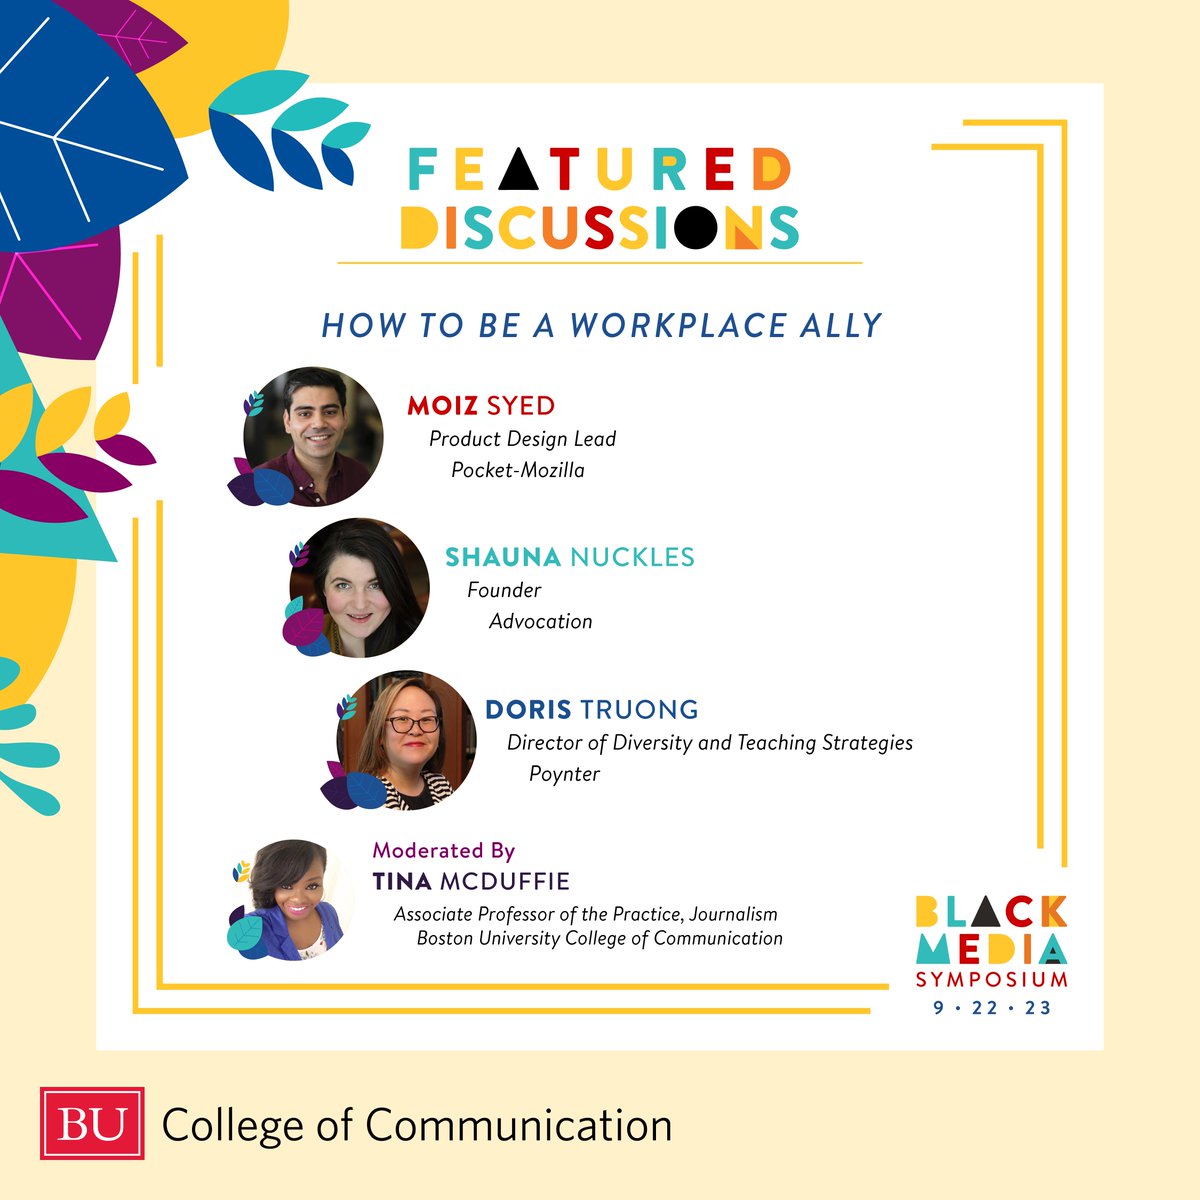 At 2 pm, our panel will explore what it actually takes to be a white ally to communicators of color in a newsroom, advertising, or PR agency, with @moizsyed, @ShaunaNuckles, and @DorisTruong, with COM's @TinaAroundTown as moderator.